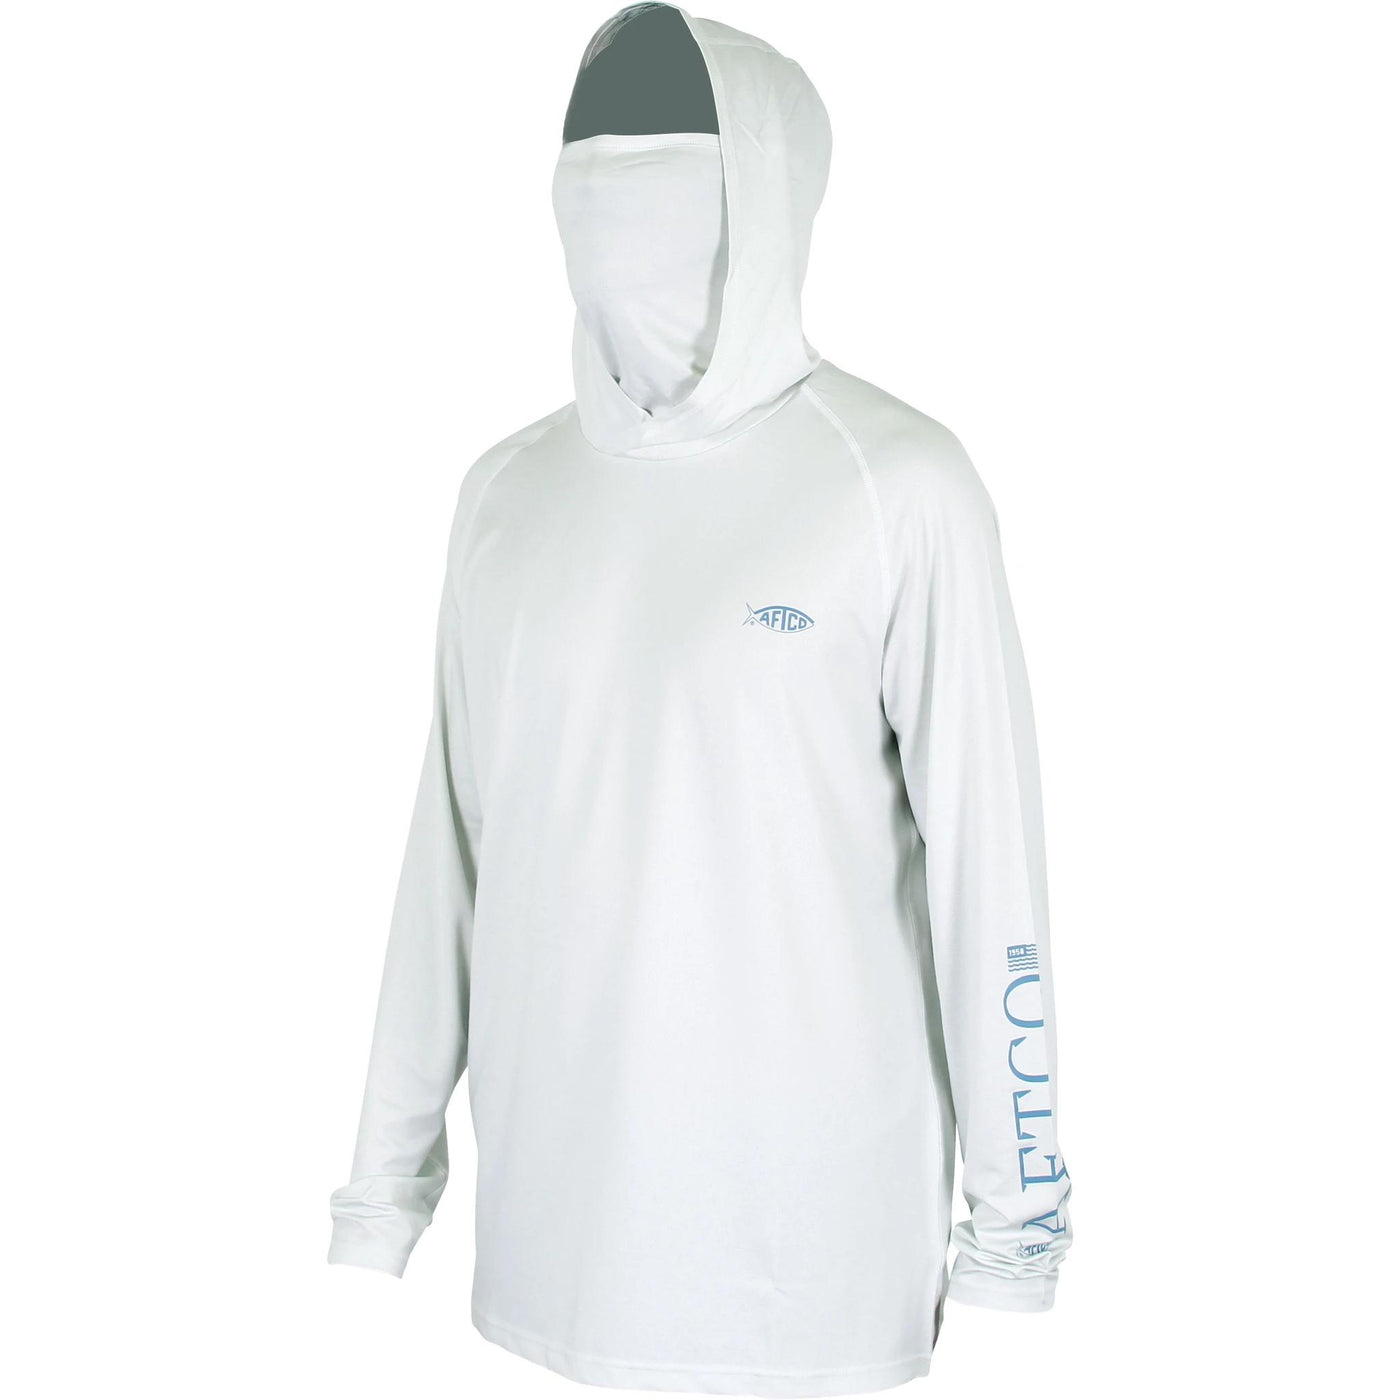 Aftco Yurei Hooded Performance Shirt-MENS CLOTHING-S-Vapor Heather-Kevin's Fine Outdoor Gear & Apparel